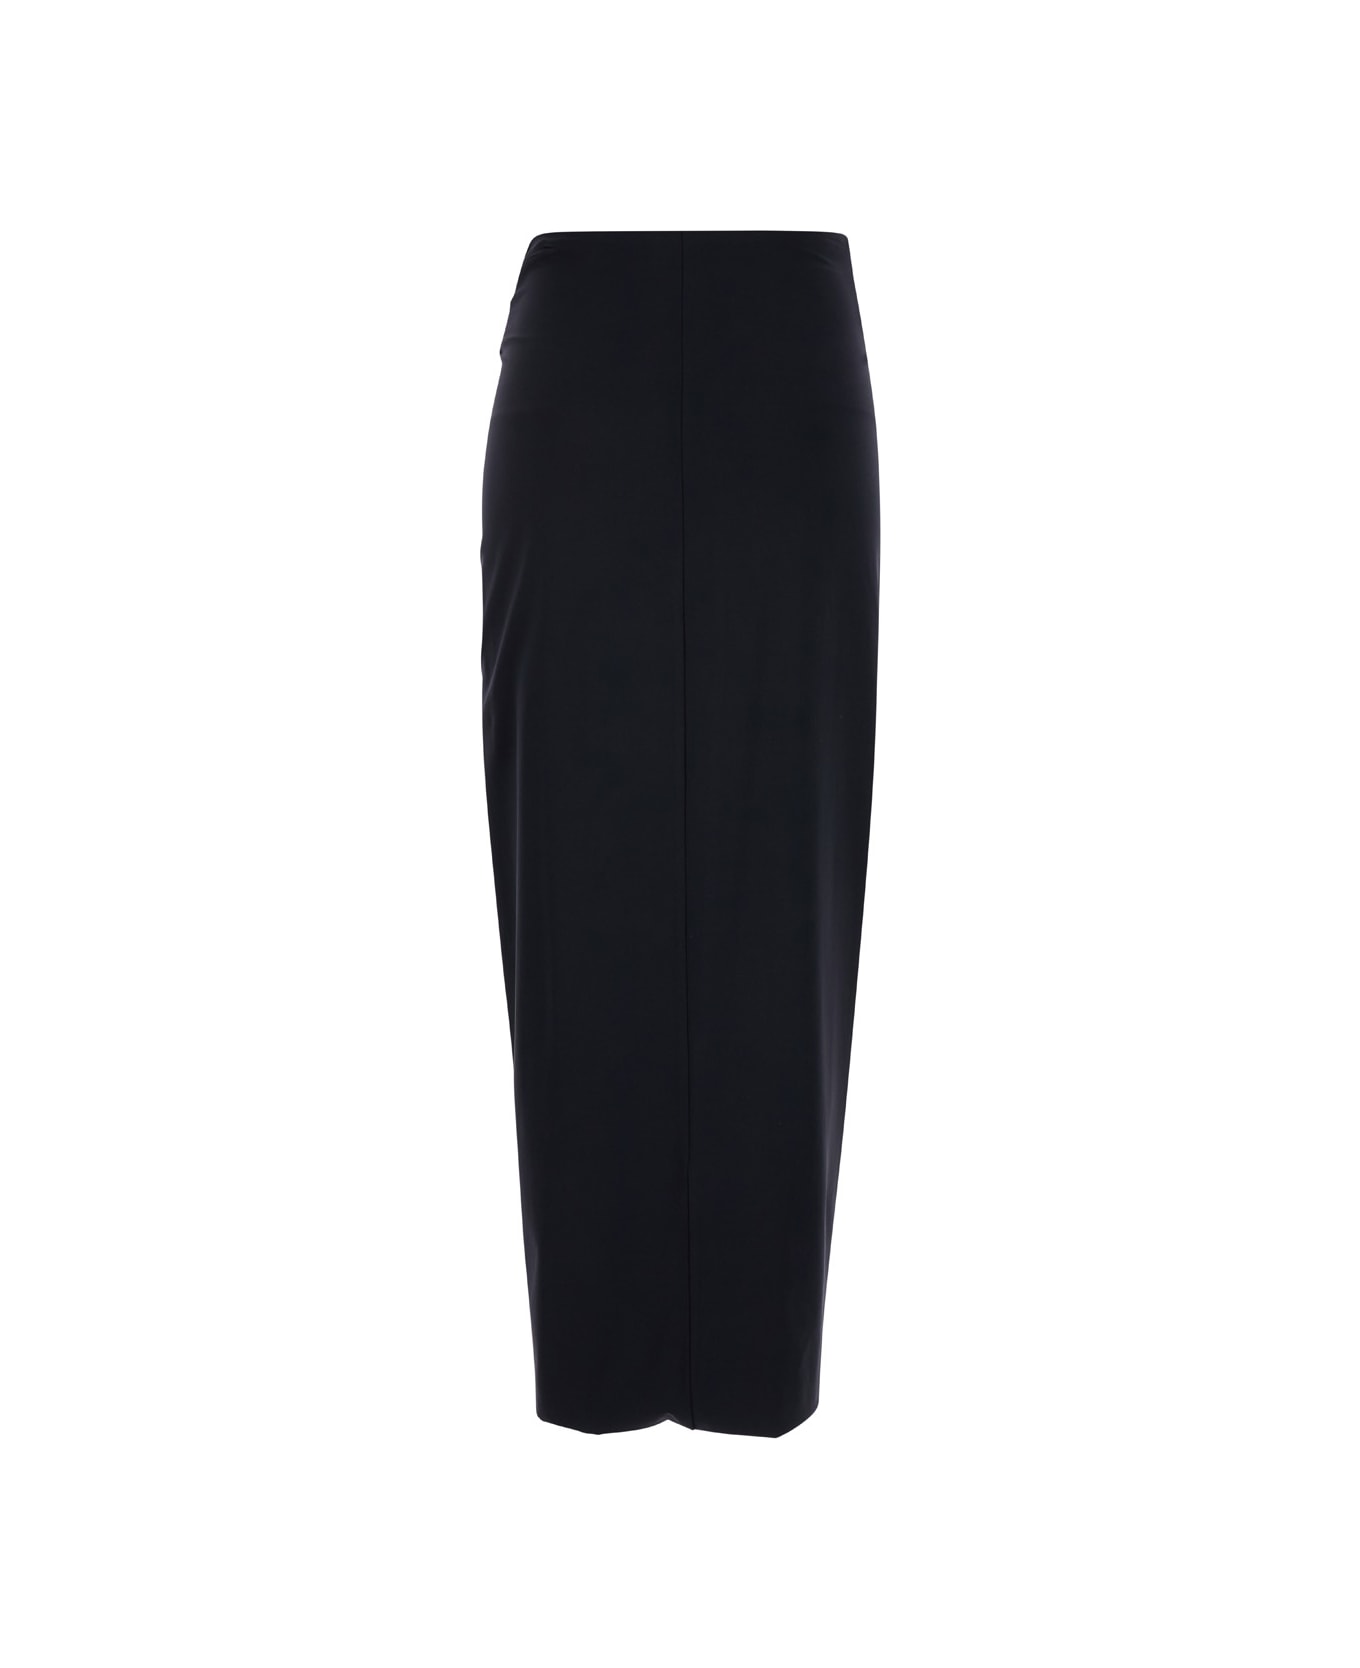 Federica Tosi Black Wrinkled Long Skirt In Techno Fabric Stretch Woman - Black